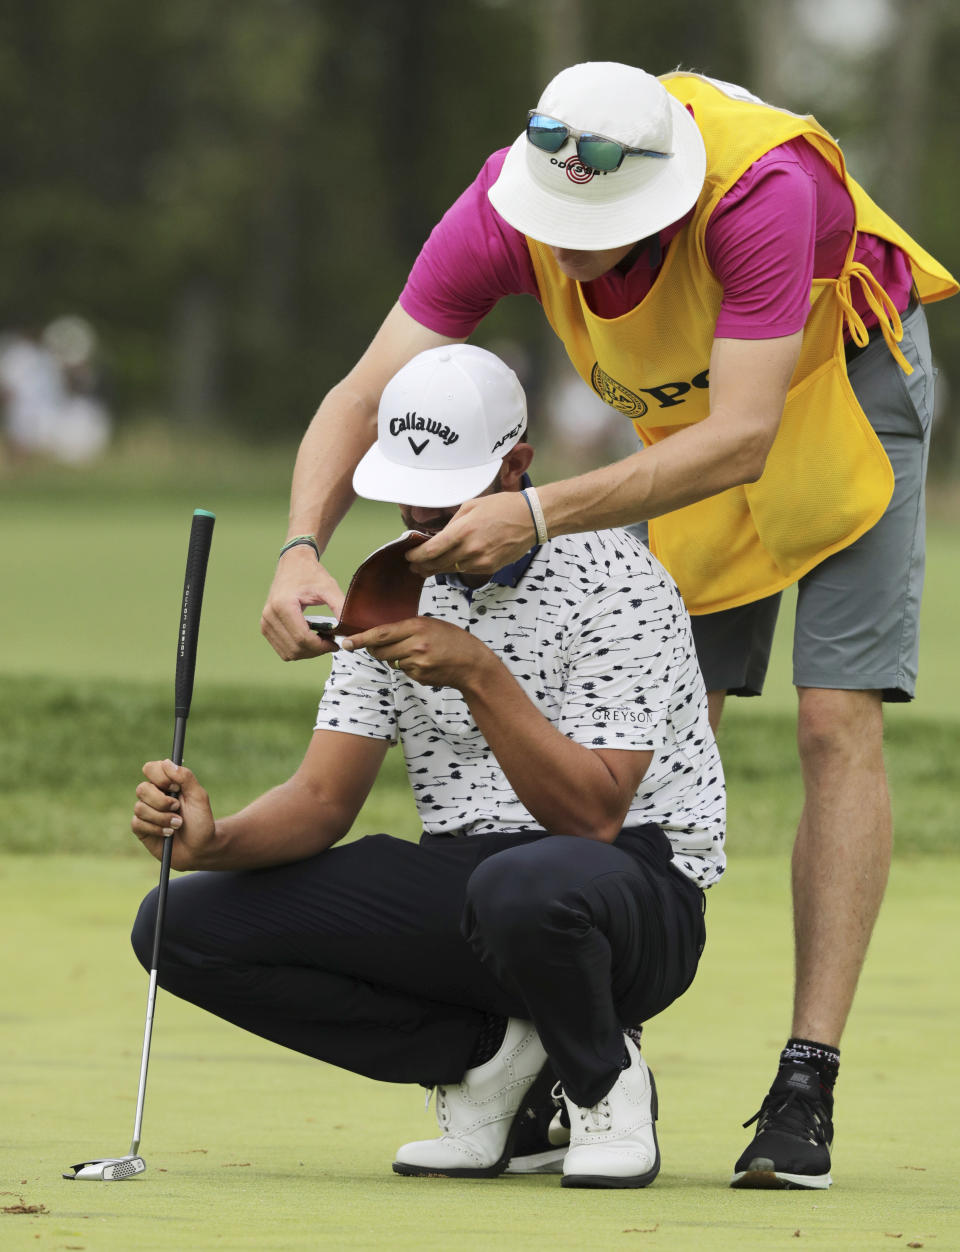 Erik Van Rooyen, of South Africa, checks his notes on the ninth green during the final round of the PGA Championship golf tournament, Sunday, May 19, 2019, at Bethpage Black in Farmingdale, N.Y. (AP Photo/Charles Krupa)